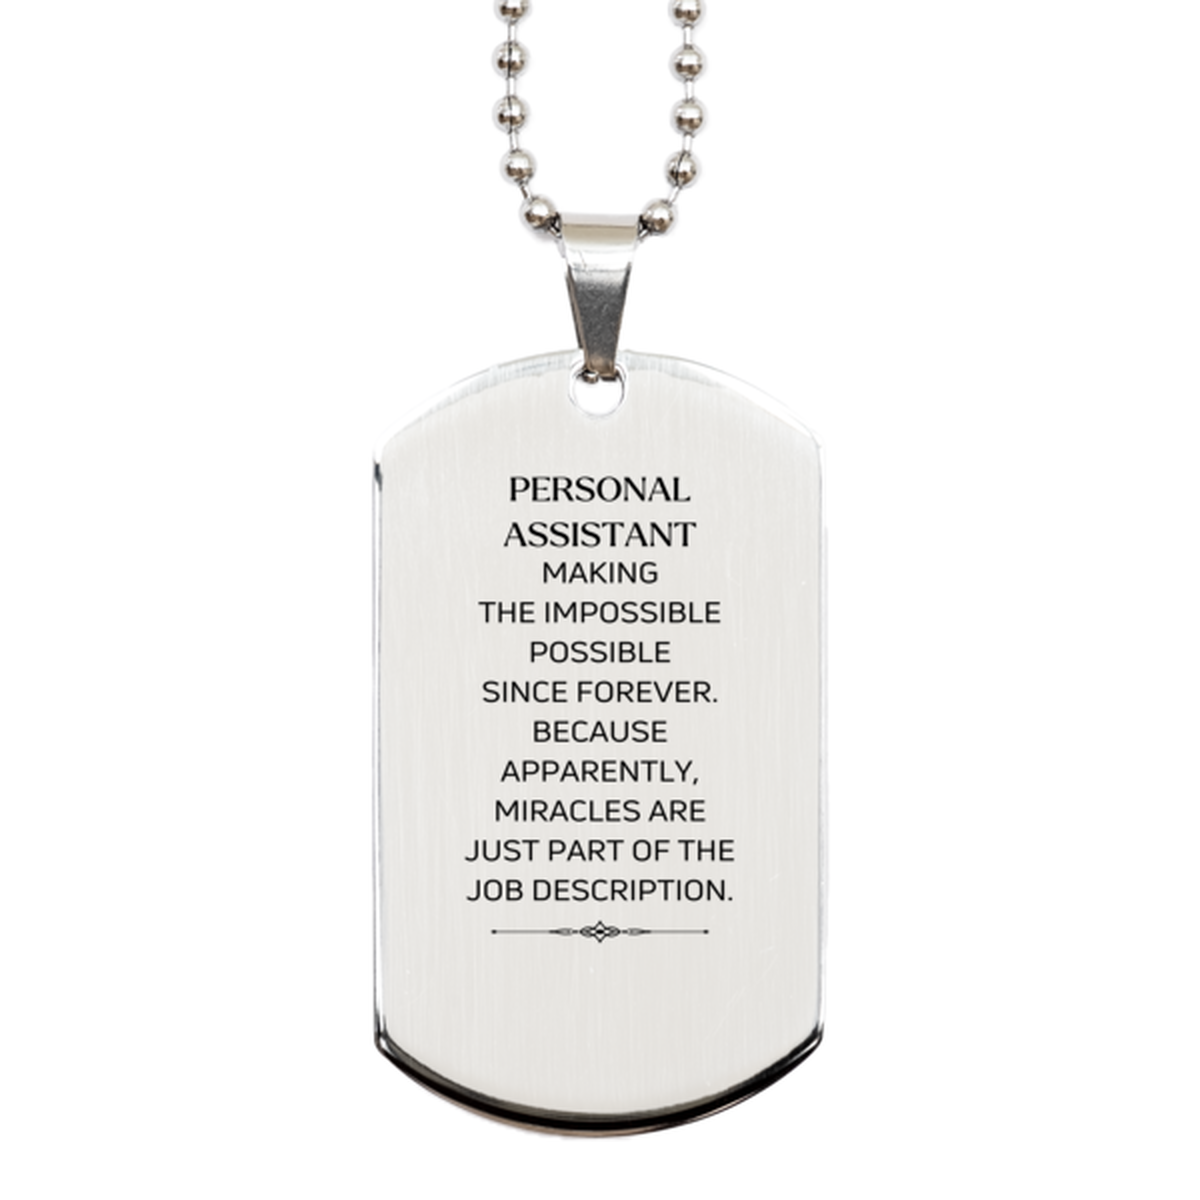 Funny Personal Assistant Gifts, Miracles are just part of the job description, Inspirational Birthday Silver Dog Tag For Personal Assistant, Men, Women, Coworkers, Friends, Boss